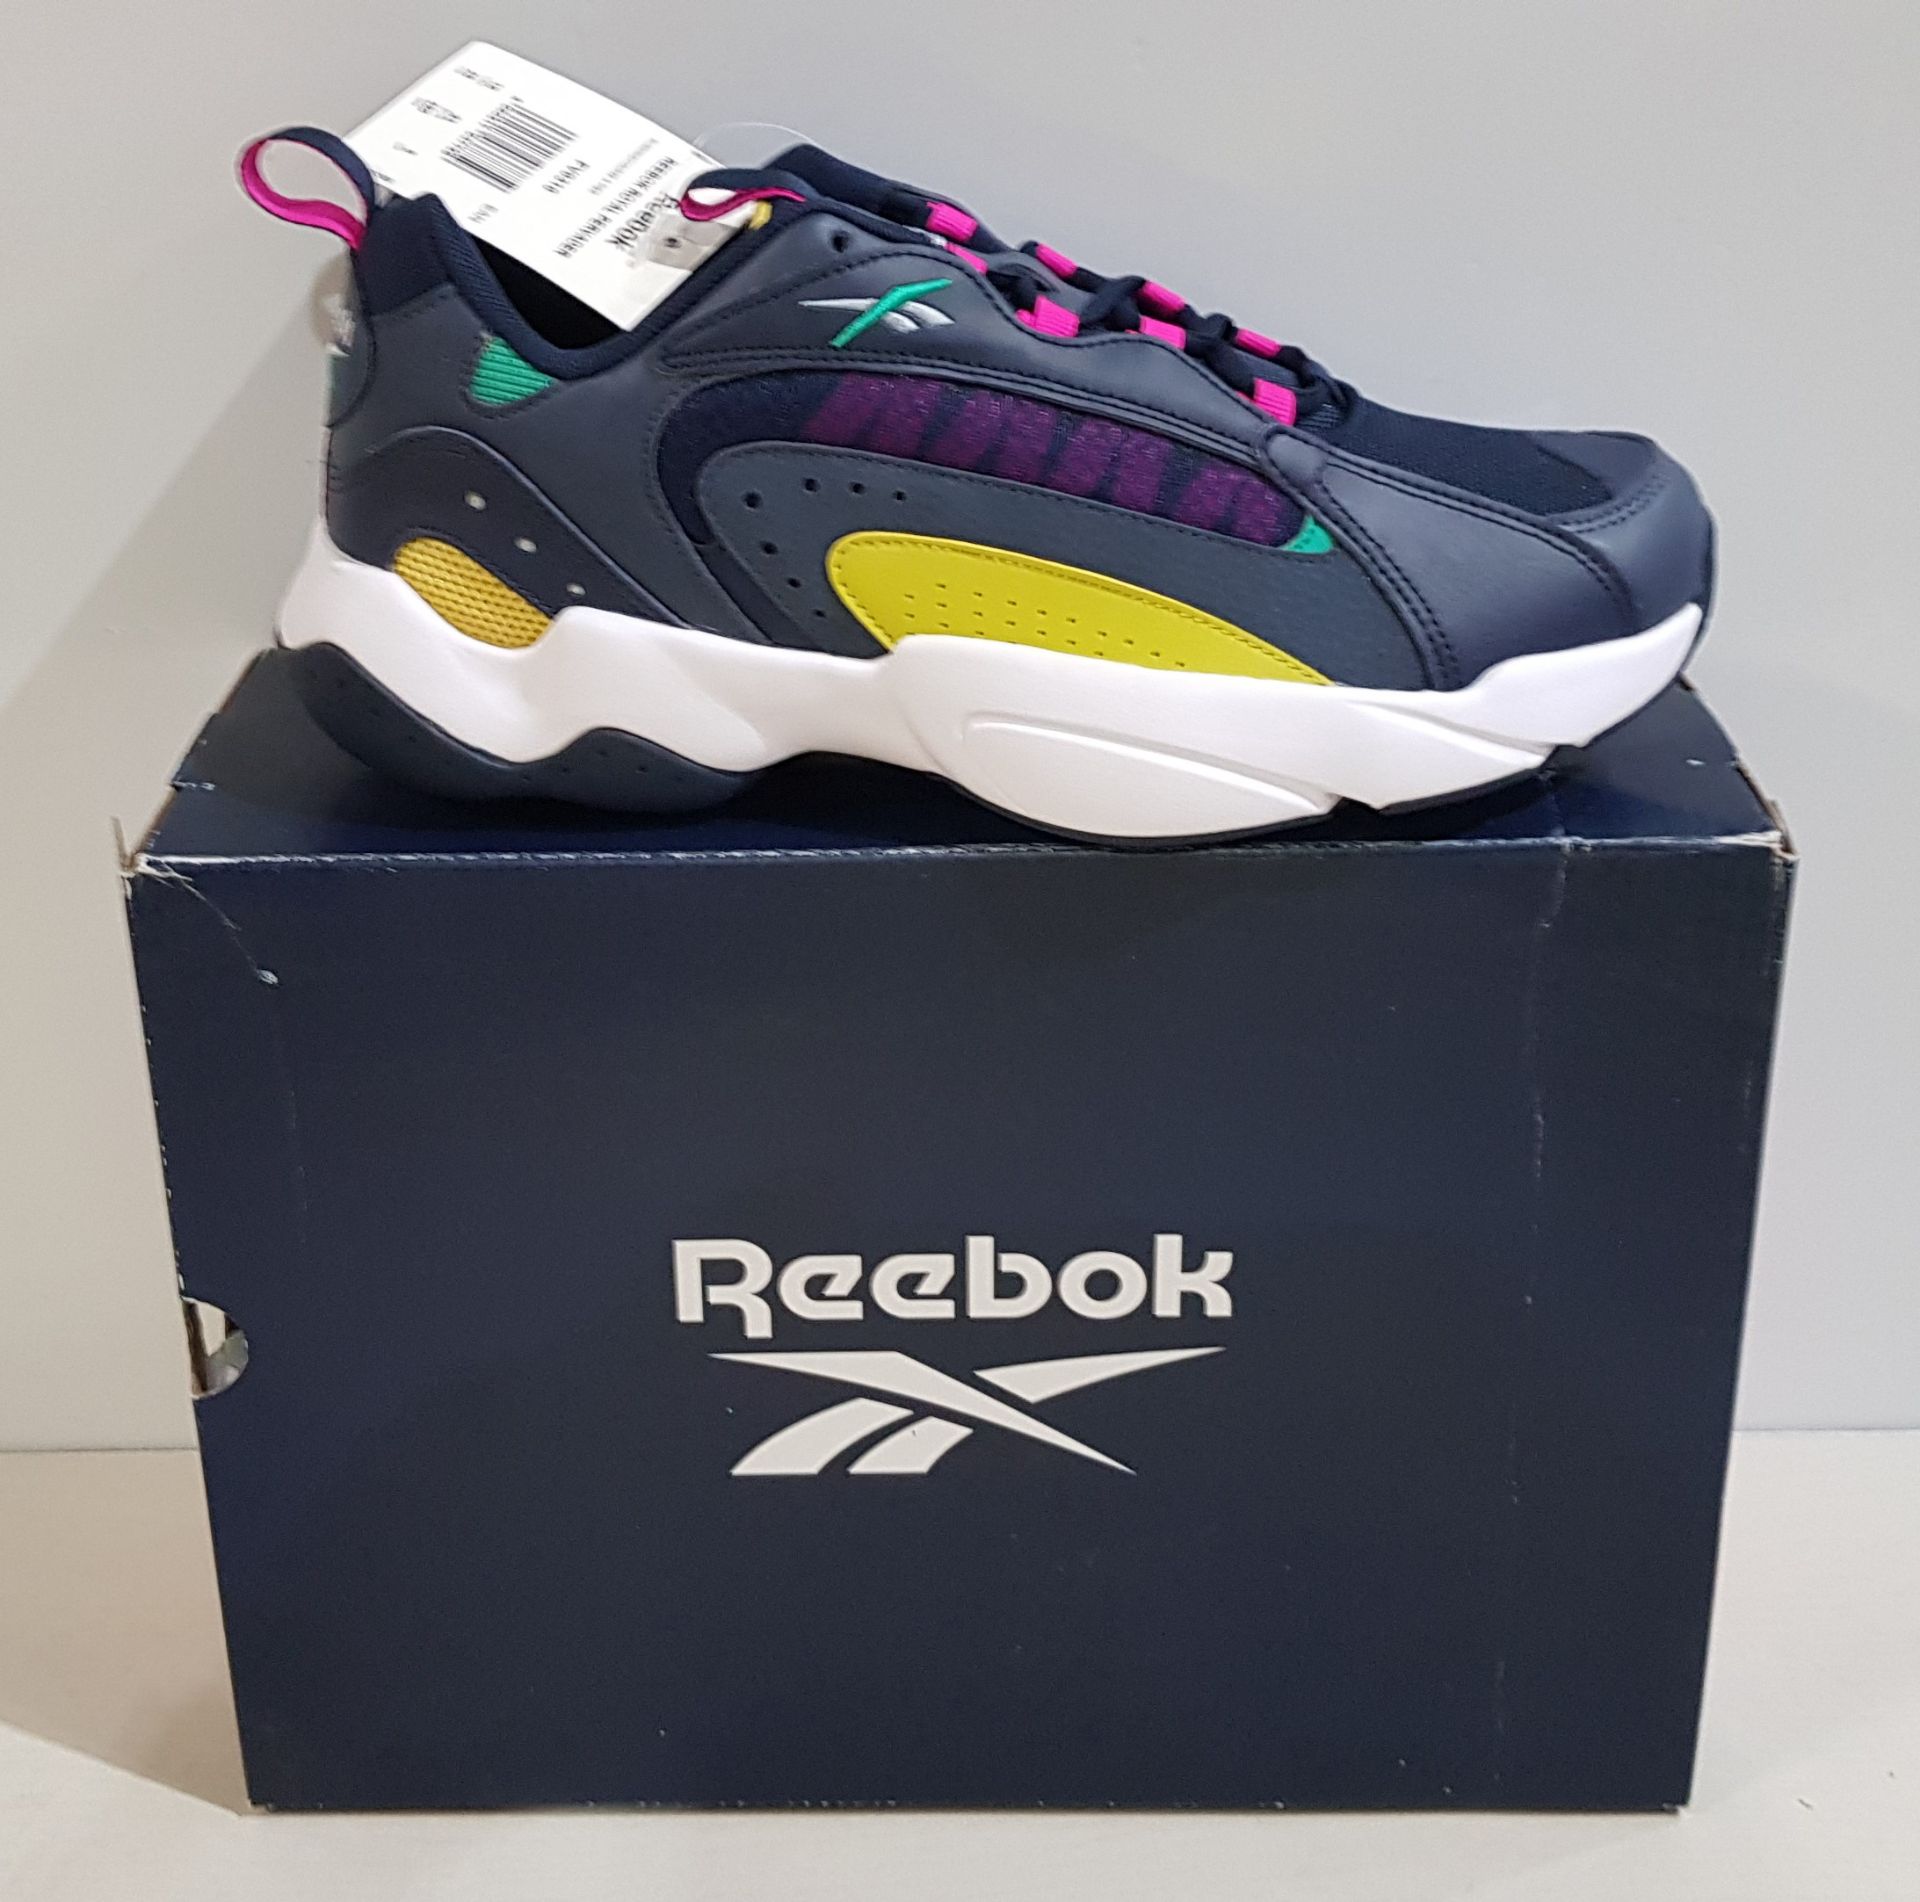 6 X BRAND NEW & BOXED REEBOK ROYAL PERVADER UNISEX RUNNING SHOES IN NAVY, PINK AND YELLOW - ALL IN